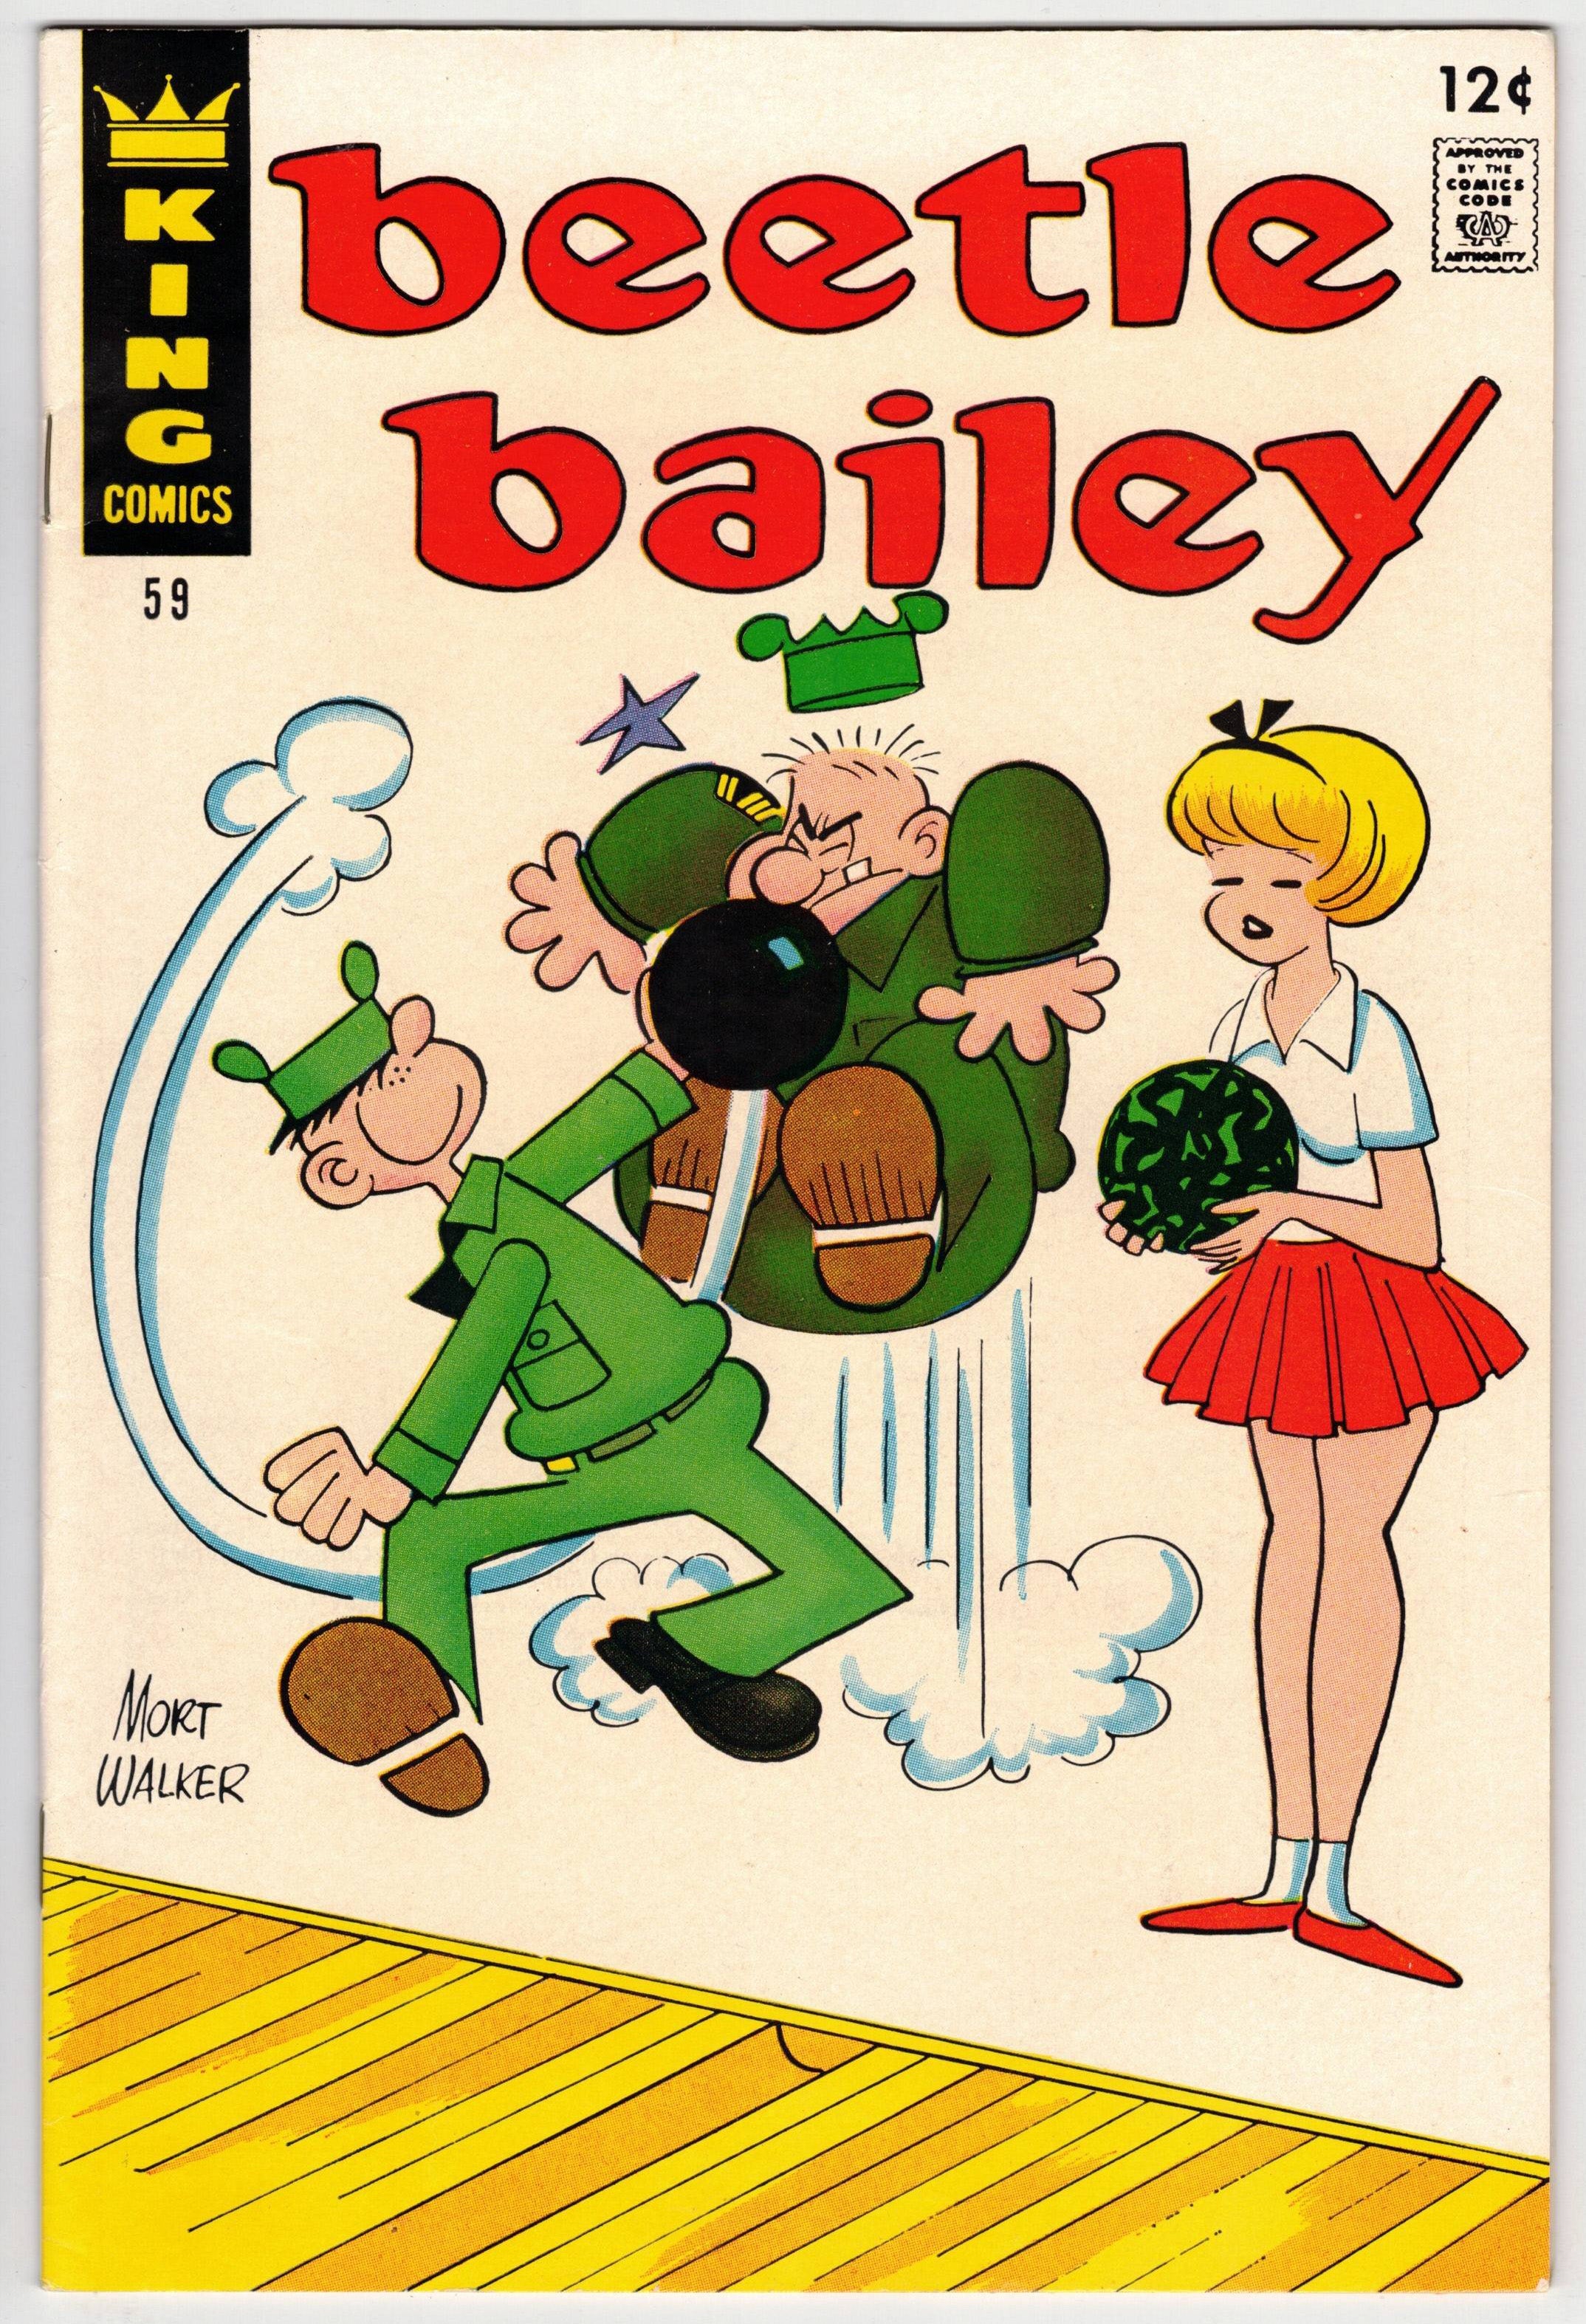 Photo of Beetle Bailey, Vol. 1 (1967) Issue 59 - Very Fine Comic sold by Stronghold Collectibles